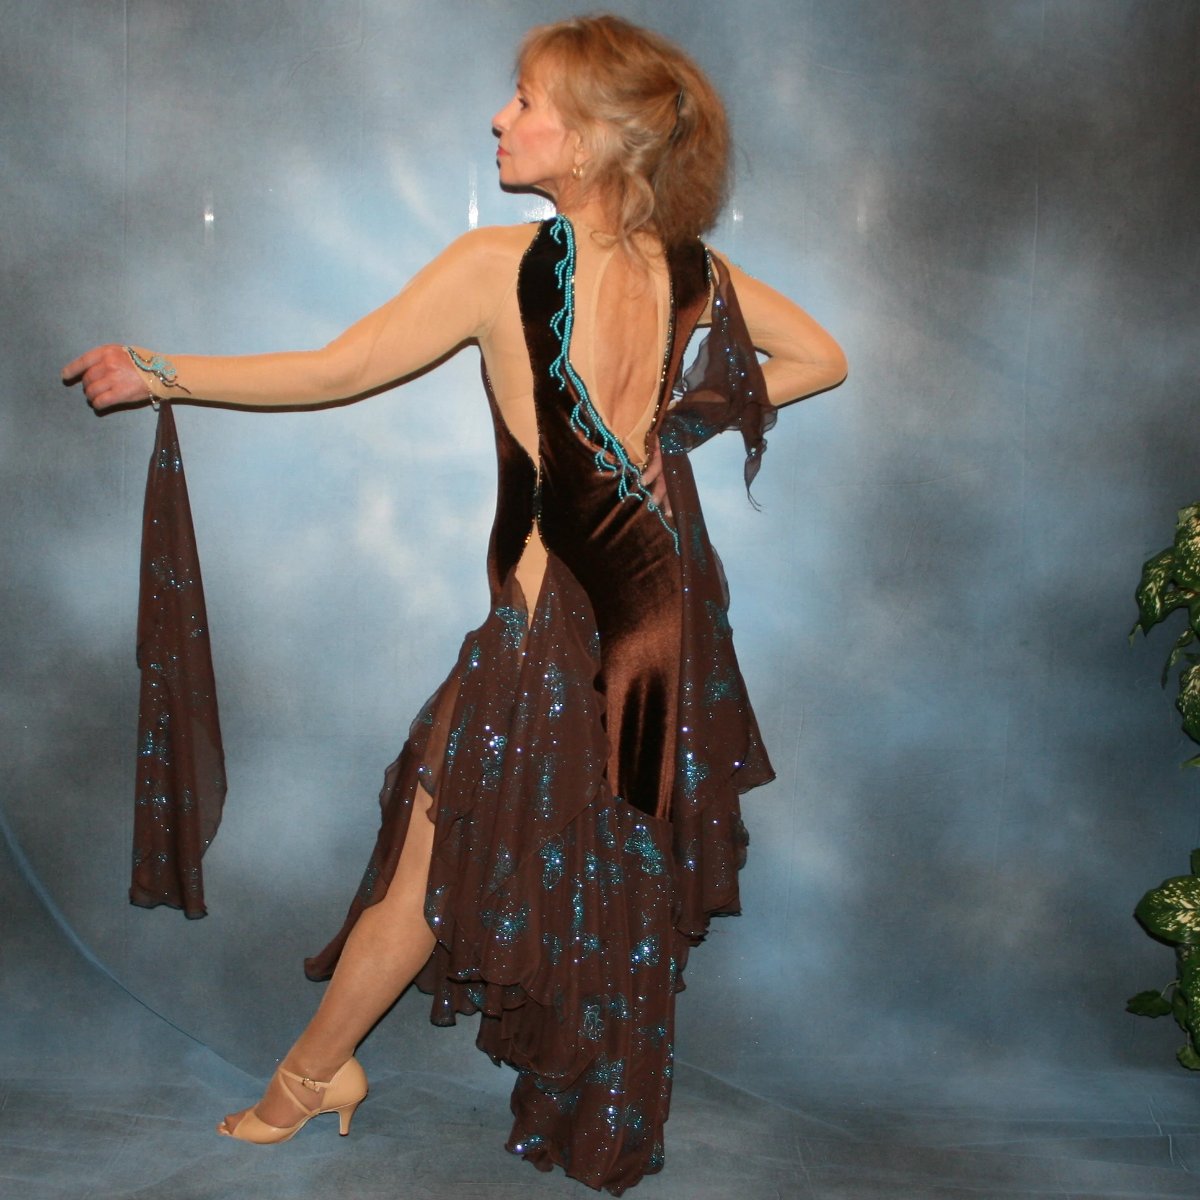 Crystal's Creations side back view of Exquisite brown ballroom dance dress with turquoise accents was created in luxurious chocolate brown stretch velvet on a nude illusion base…featuring billowing yards of brown chiffon petal panels with glittery turquoise butterflies. 